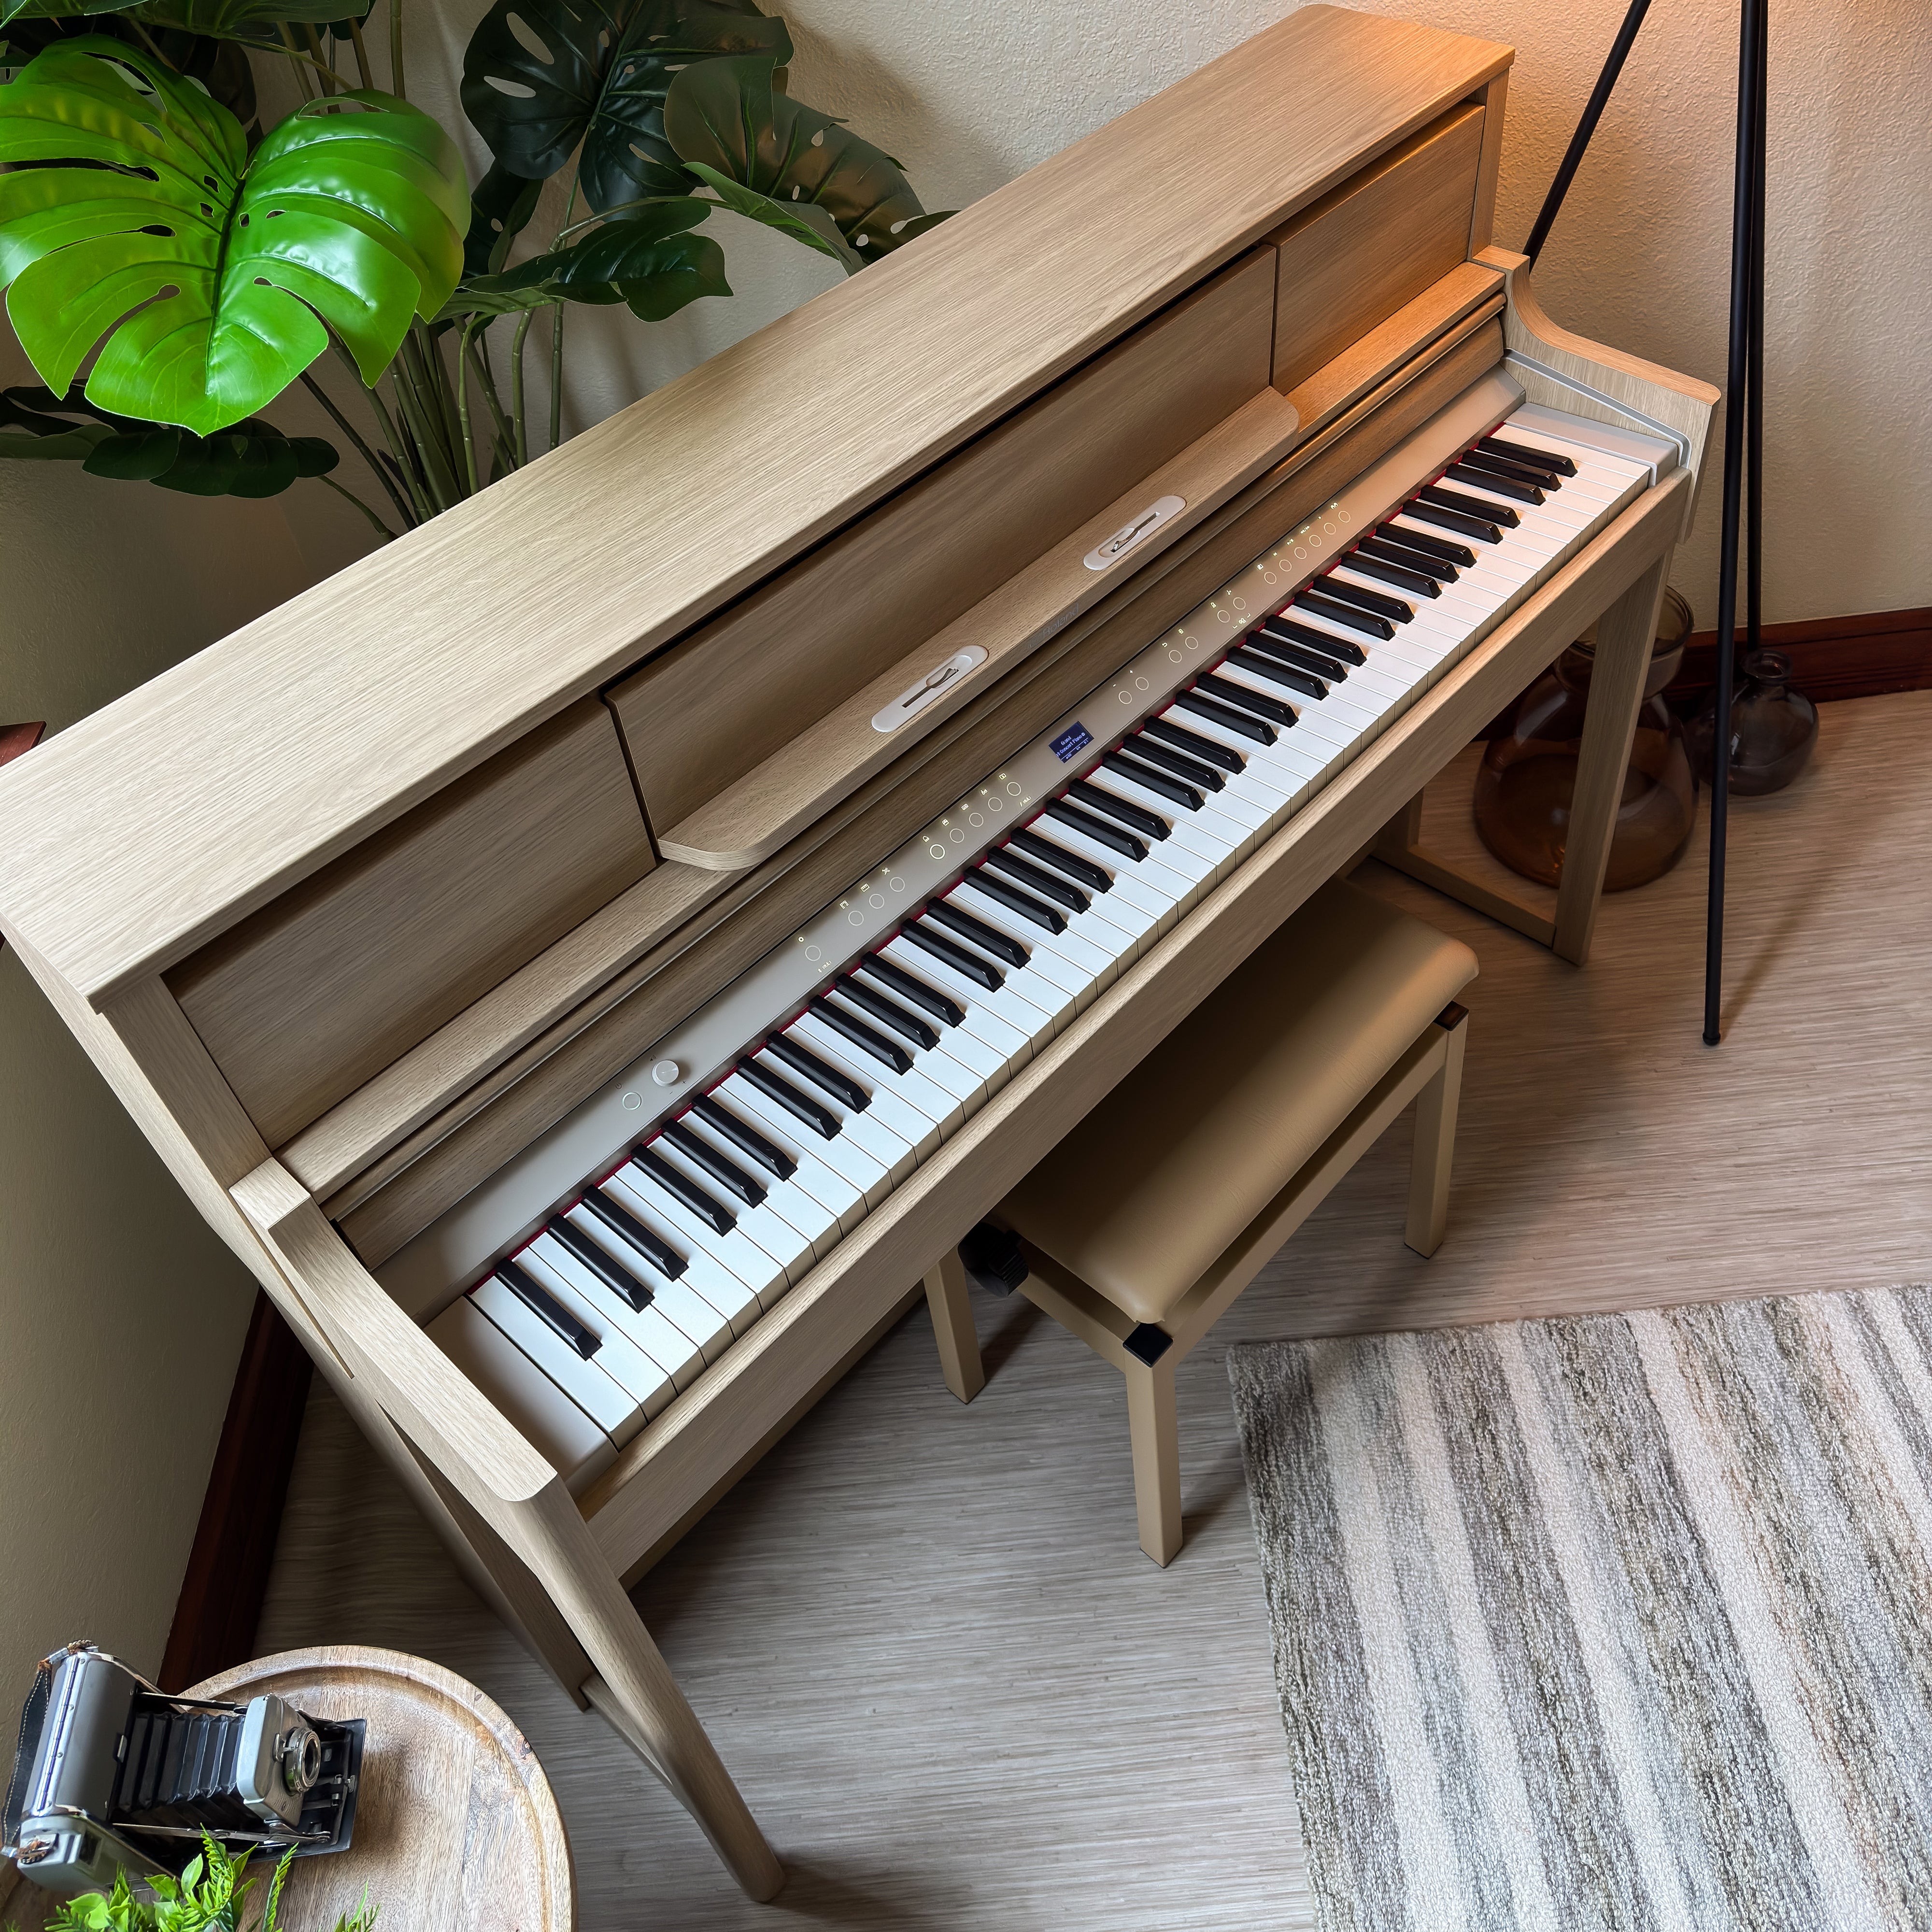 Roland LX-5 Digital Piano with Bench - Light Oak - View 6